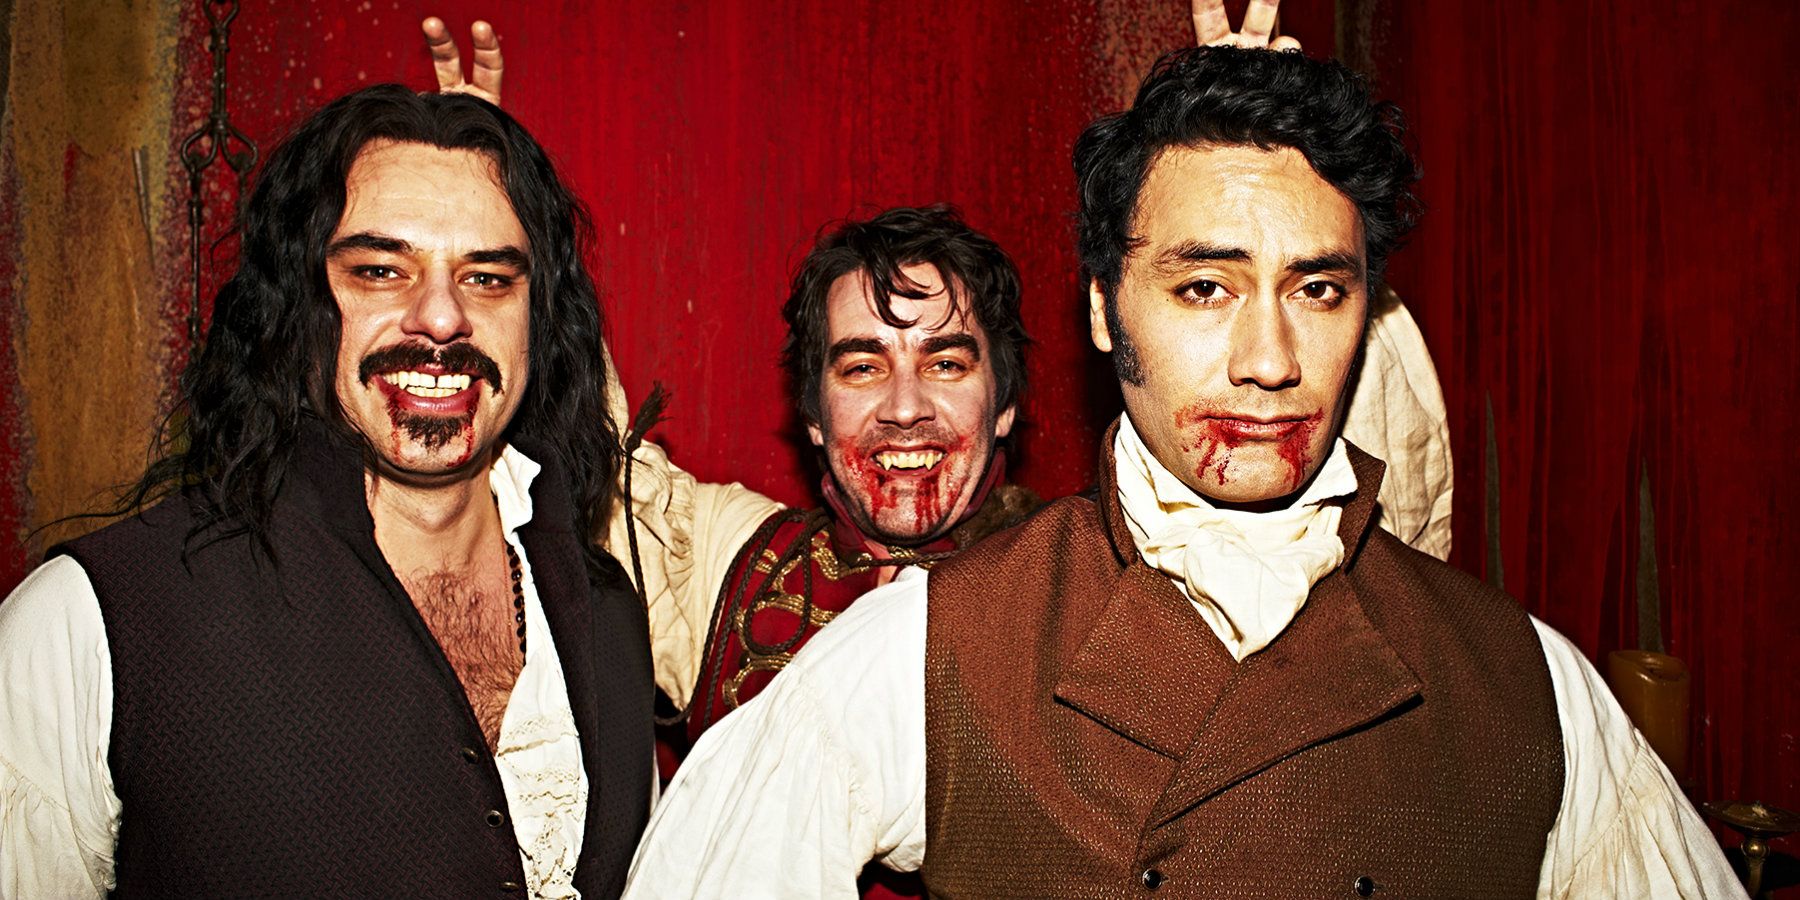 What We Do in the Shadows movie cast with Jemaine Clements and Taika Waititi